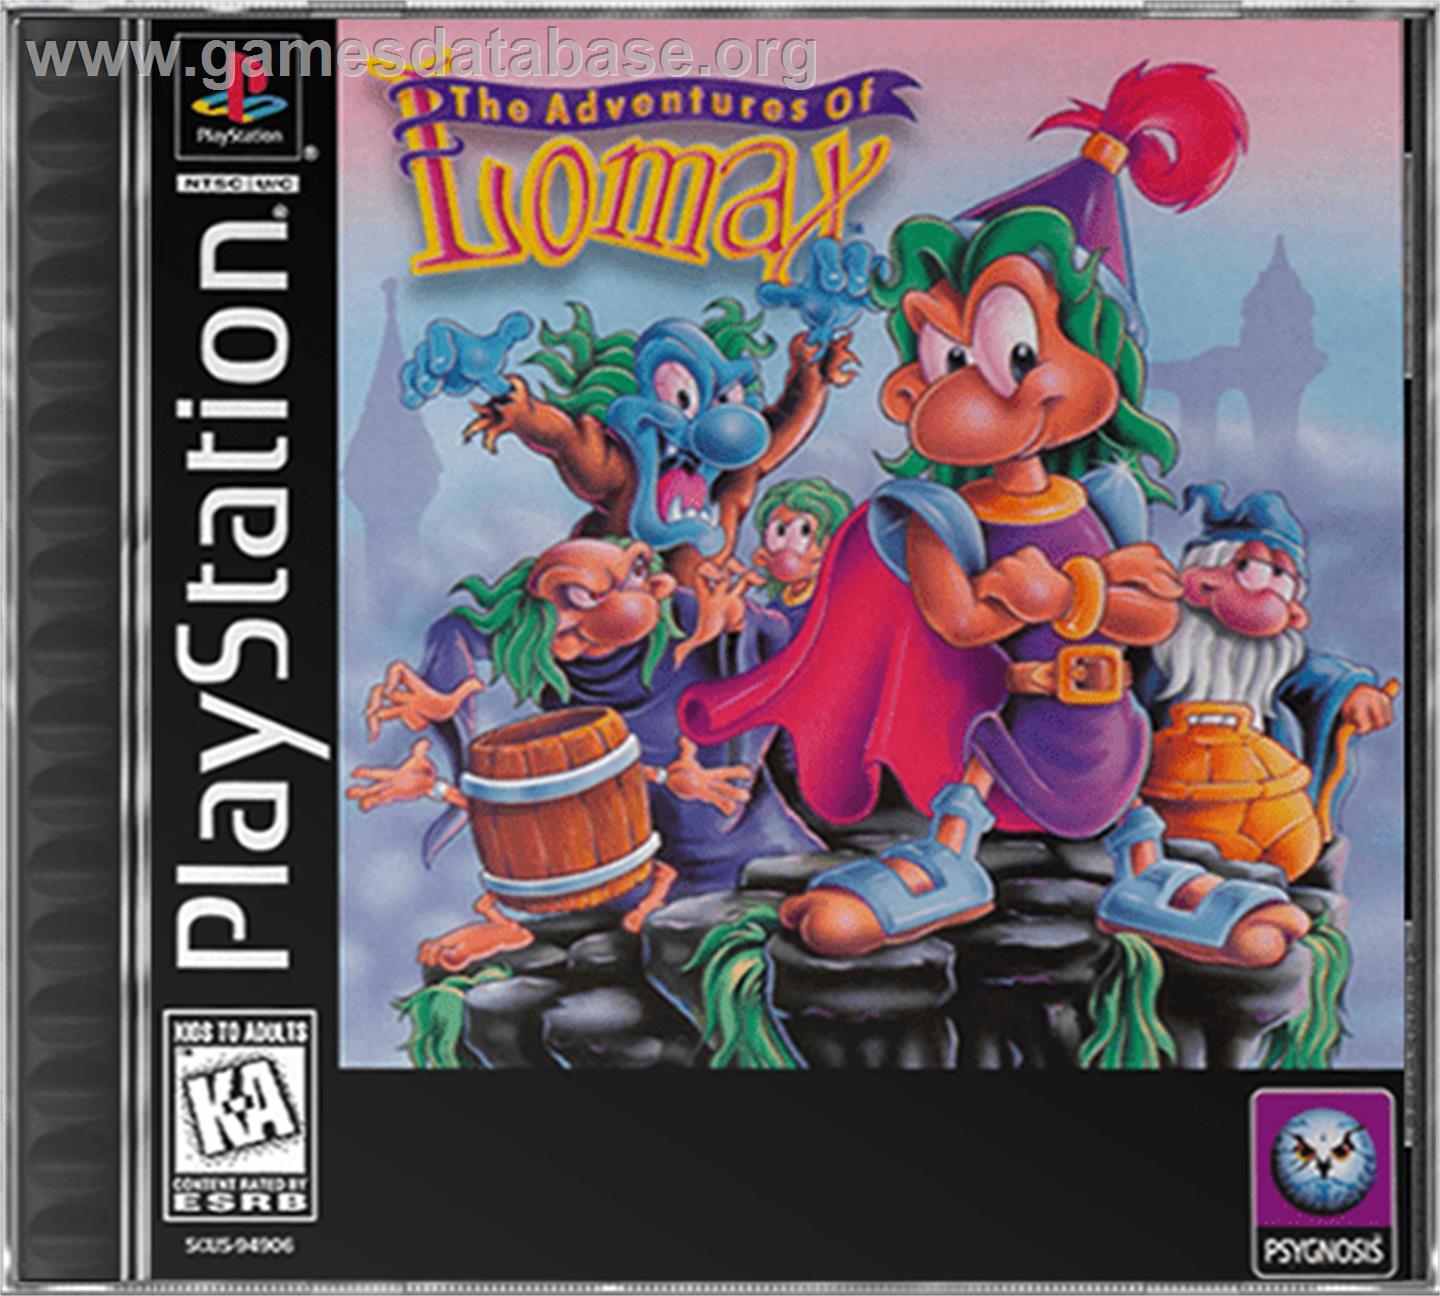 The Adventures of Lomax - Sony Playstation - Artwork - Box